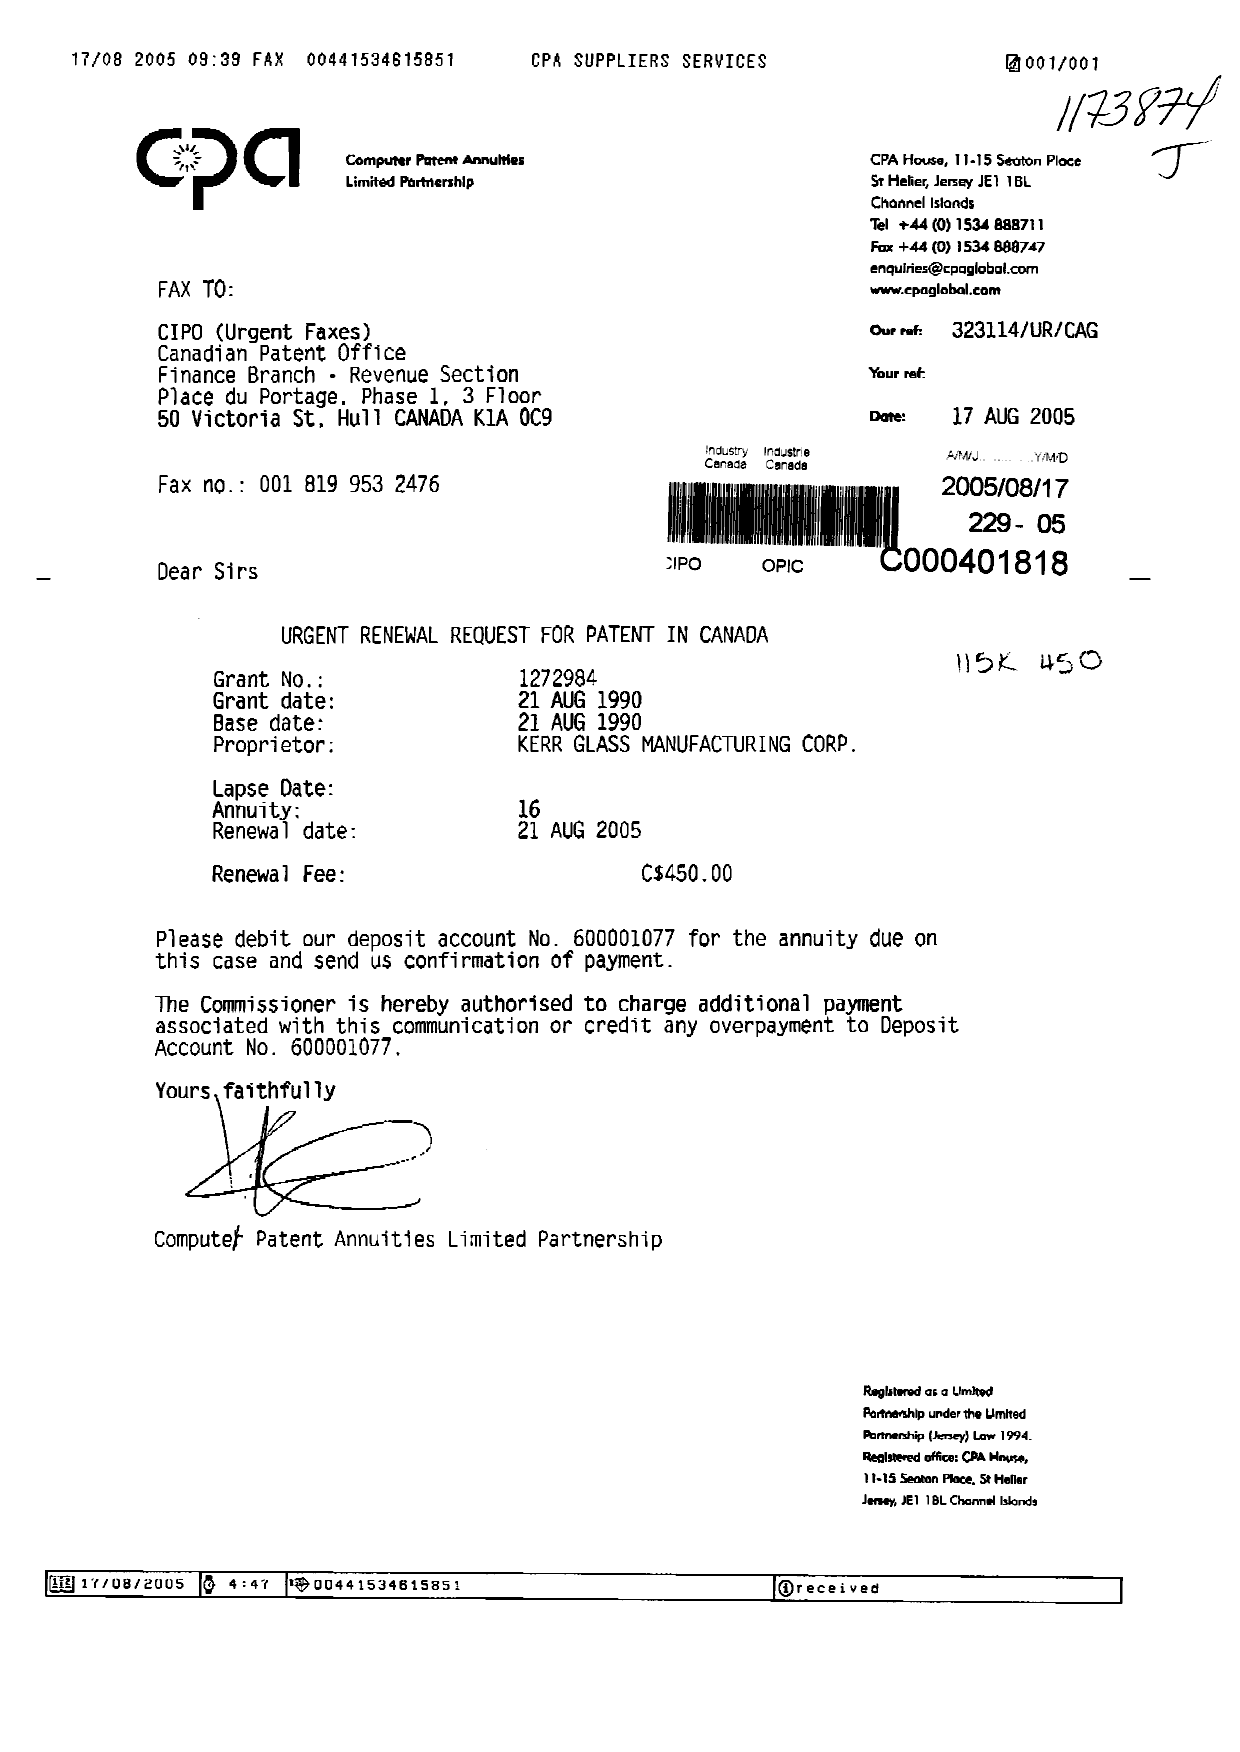 Canadian Patent Document 1272984. Fees 20050817. Image 1 of 1